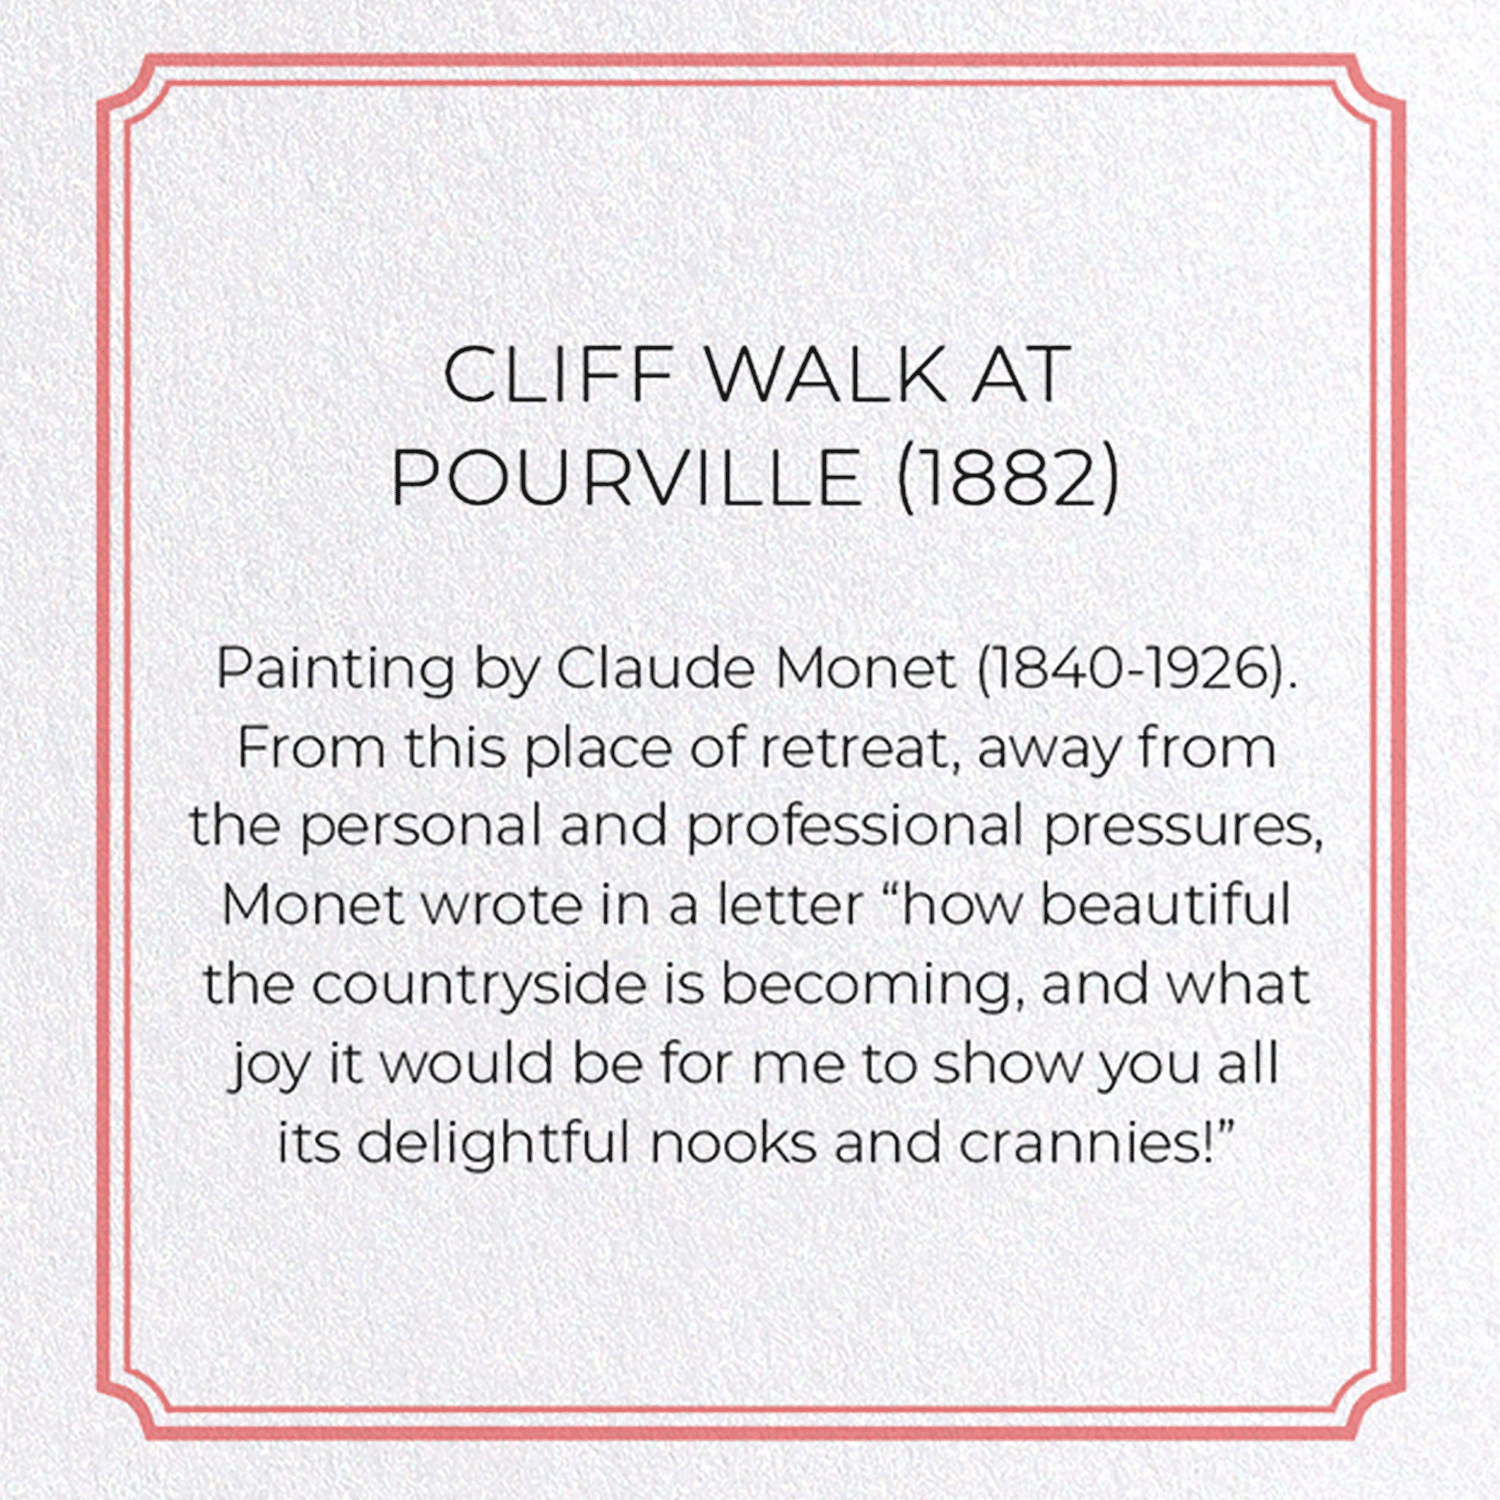 CLIFF WALK AT POURVILLE (1882): Painting Greeting Card